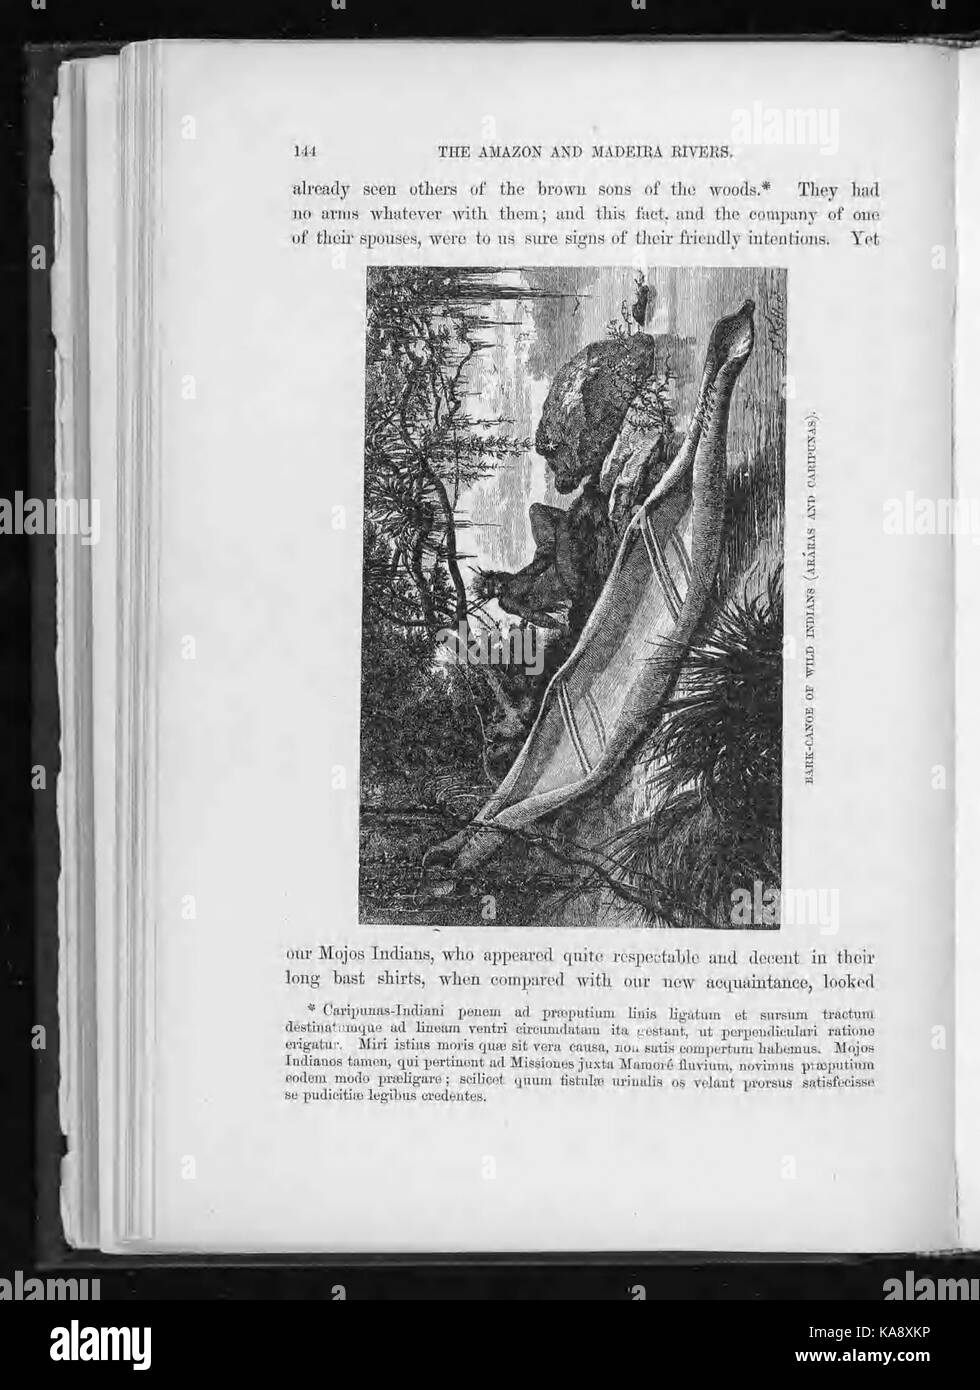 The Amazon and Madeira rivers (Page 144) BHL48439661 Stock Photo